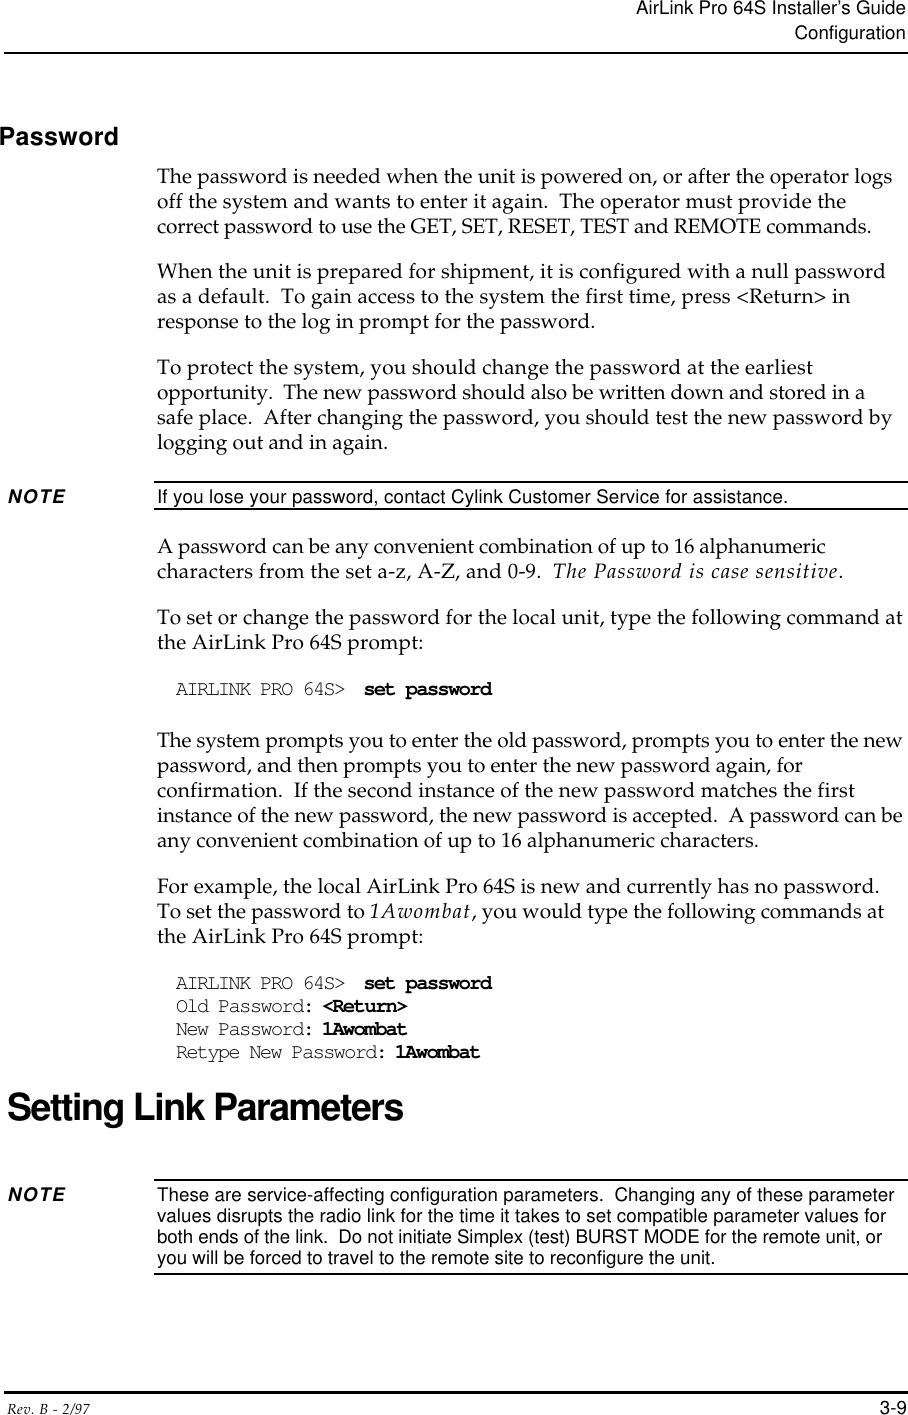 AirLink Pro 64S Installer’s GuideConfigurationRev. B - 2/97 3-9PasswordThe password is needed when the unit is powered on, or after the operator logsoff the system and wants to enter it again.  The operator must provide thecorrect password to use the GET, SET, RESET, TEST and REMOTE commands.When the unit is prepared for shipment, it is configured with a null passwordas a default.  To gain access to the system the first time, press &lt;Return&gt; inresponse to the log in prompt for the password.To protect the system, you should change the password at the earliestopportunity.  The new password should also be written down and stored in asafe place.  After changing the password, you should test the new password bylogging out and in again.NOTE If you lose your password, contact Cylink Customer Service for assistance.A password can be any convenient combination of up to 16 alphanumericcharacters from the set a-z, A-Z, and 0-9.  The Password is case sensitive.To set or change the password for the local unit, type the following command atthe AirLink Pro 64S prompt:AIRLINK PRO 64S&gt;  set passwordThe system prompts you to enter the old password, prompts you to enter the newpassword, and then prompts you to enter the new password again, forconfirmation.  If the second instance of the new password matches the firstinstance of the new password, the new password is accepted.  A password can beany convenient combination of up to 16 alphanumeric characters.For example, the local AirLink Pro 64S is new and currently has no password.To set the password to 1Awombat, you would type the following commands atthe AirLink Pro 64S prompt:AIRLINK PRO 64S&gt;  set passwordOld Password: &lt;Return&gt;New Password: 1AwombatRetype New Password: 1AwombatSetting Link ParametersNOTE These are service-affecting configuration parameters.  Changing any of these parametervalues disrupts the radio link for the time it takes to set compatible parameter values forboth ends of the link.  Do not initiate Simplex (test) BURST MODE for the remote unit, oryou will be forced to travel to the remote site to reconfigure the unit.